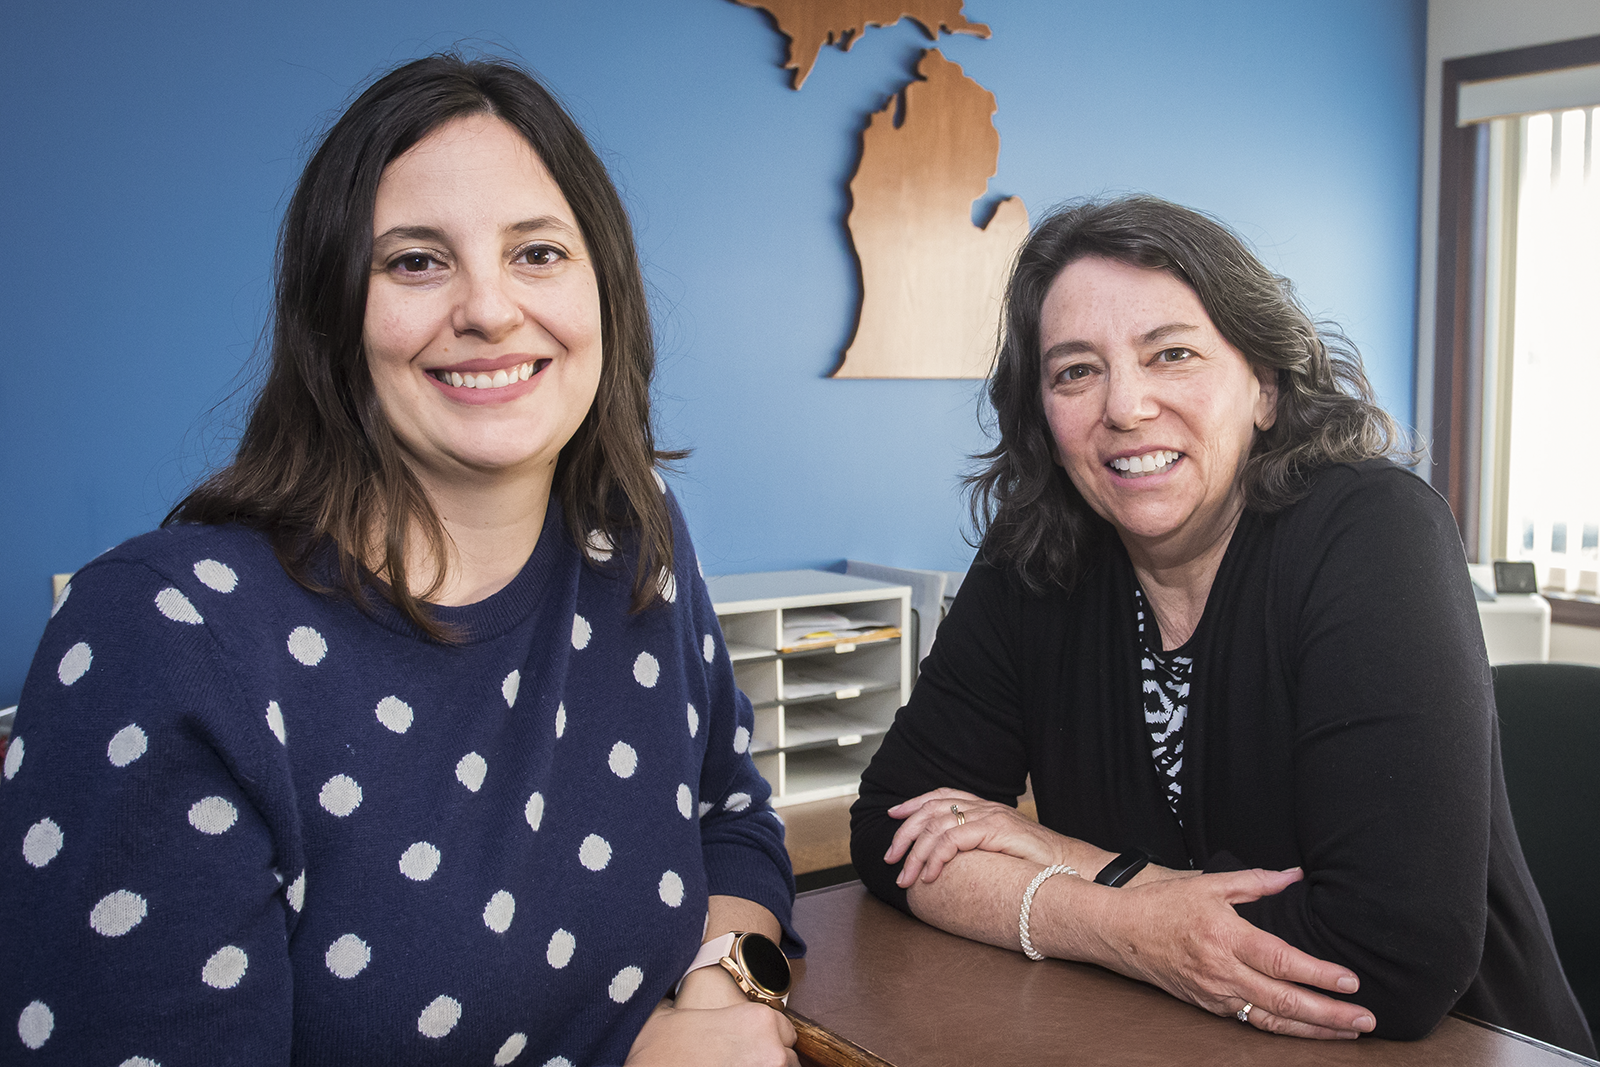 Nicole Shannon, systemic litigation and advocacy attorney for the Michigan Elder Justice Initiative, and Alison Hirschel, director and managing attorney of the Michigan Elder Justice Initiative.